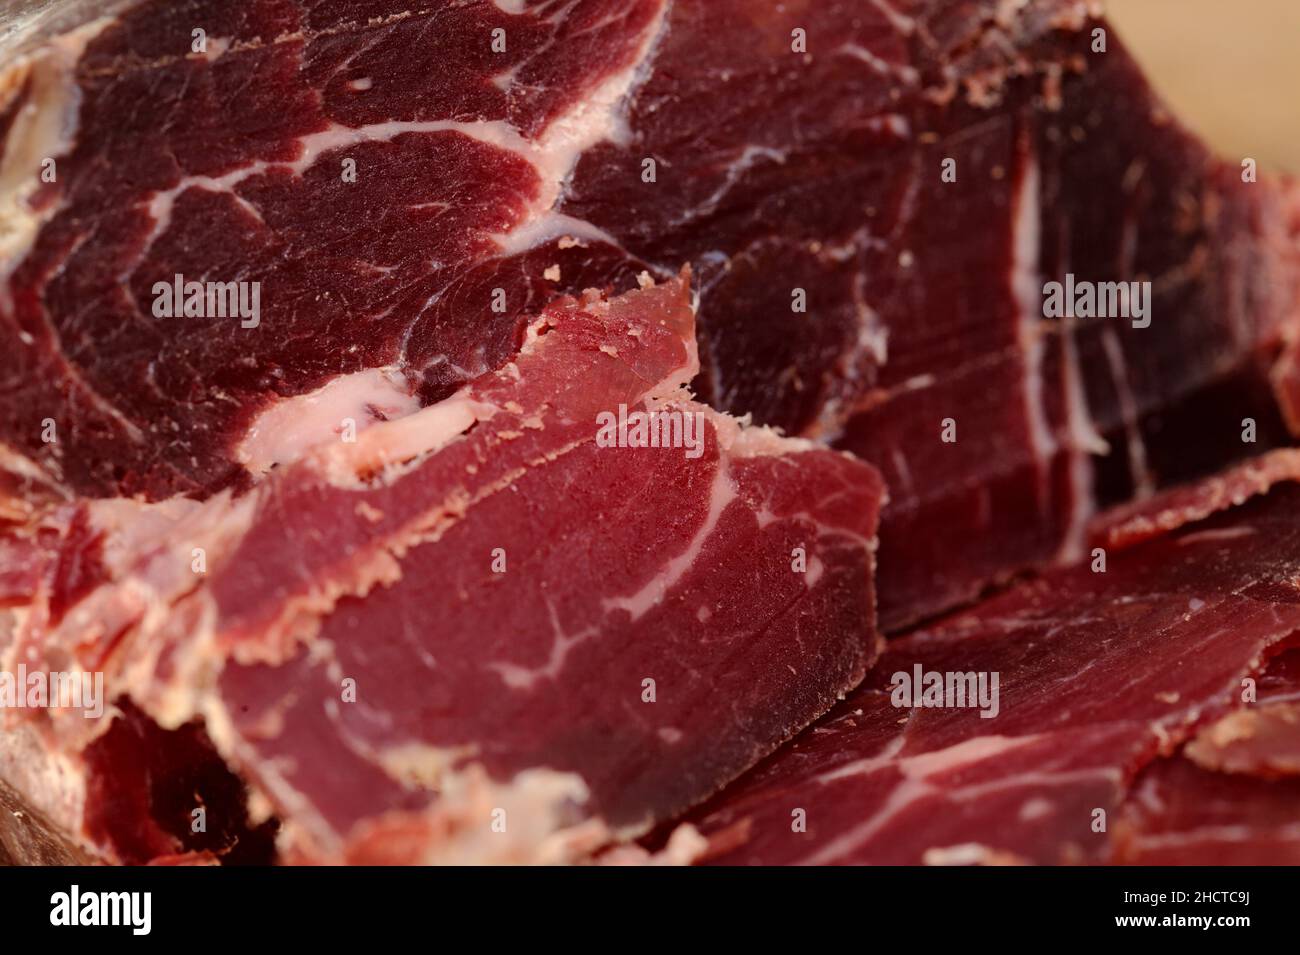 Cecina de Leon, salted and air dried beef from Leon province, local speciality Stock Photo